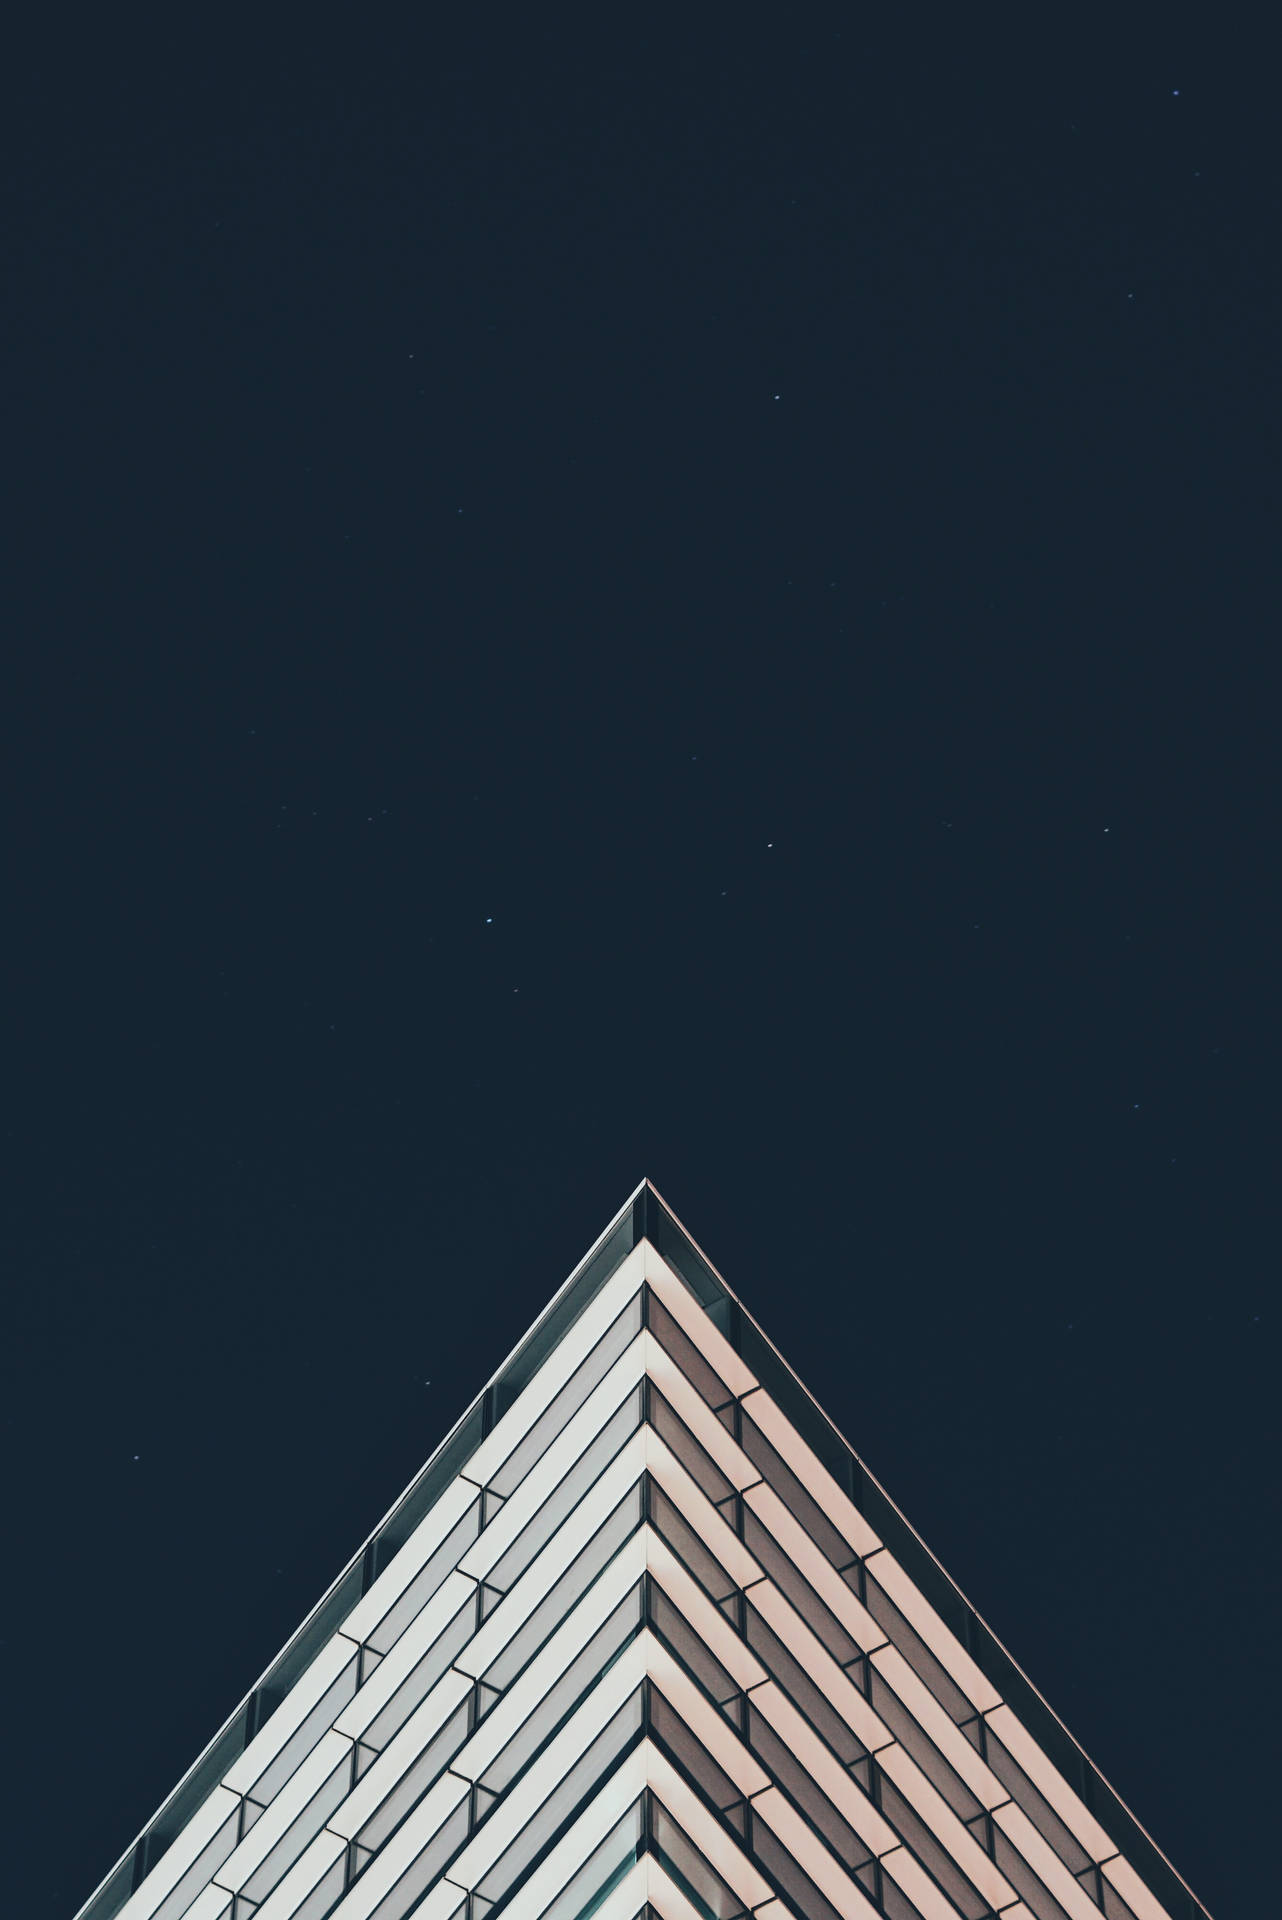 2671X4000 Minimal Wallpaper and Background